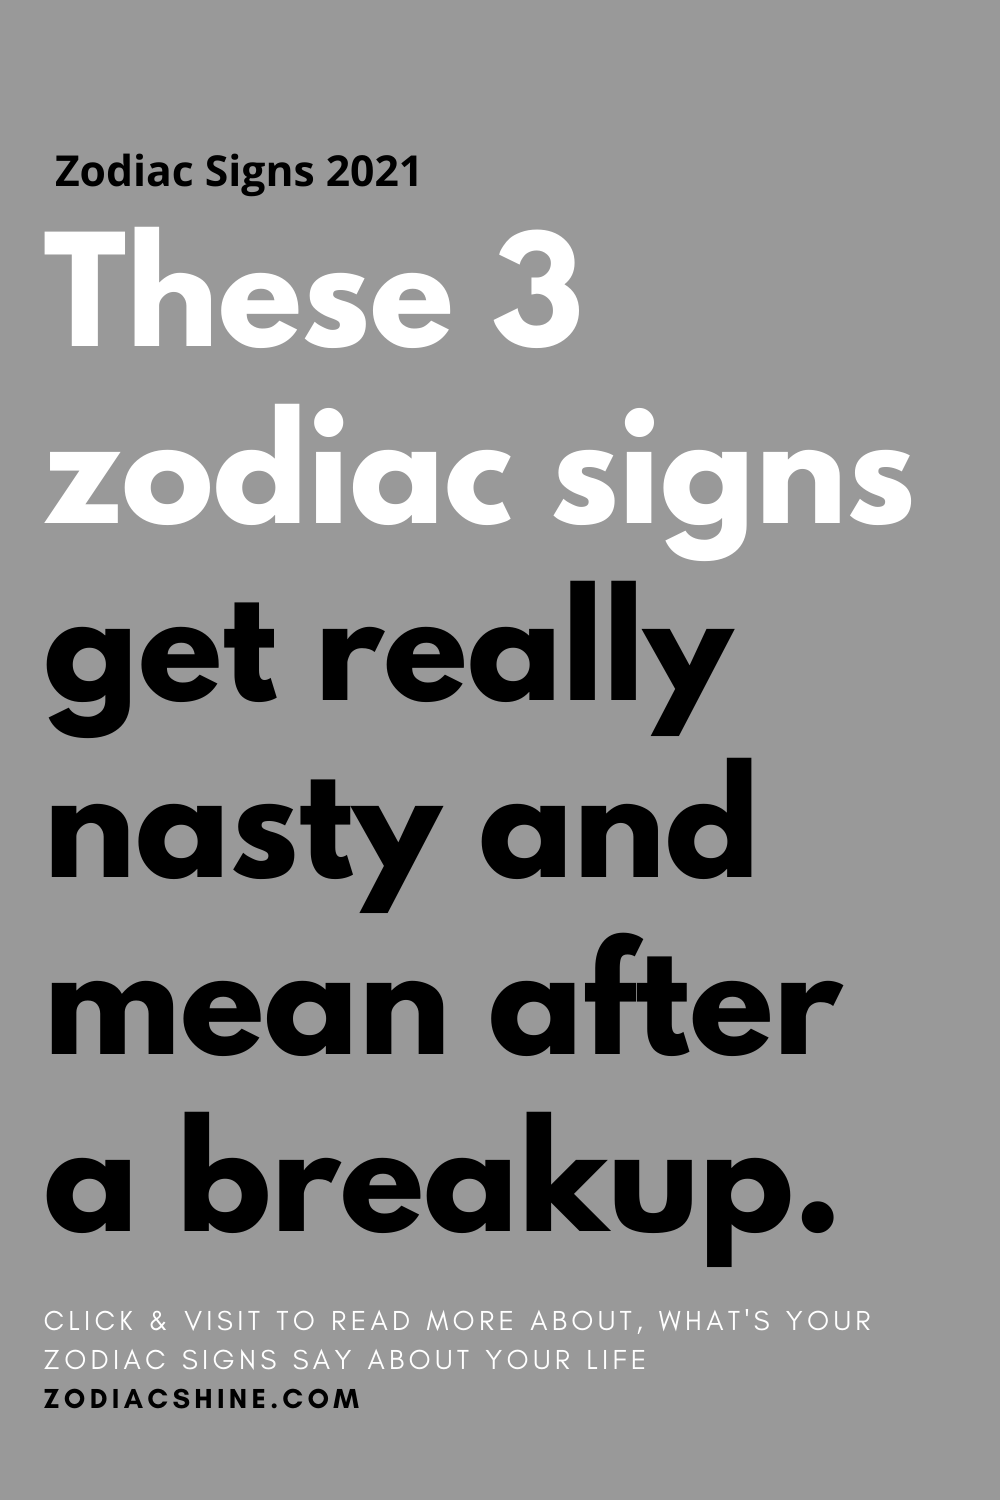 These 3 zodiac signs get really nasty and mean after a breakup.